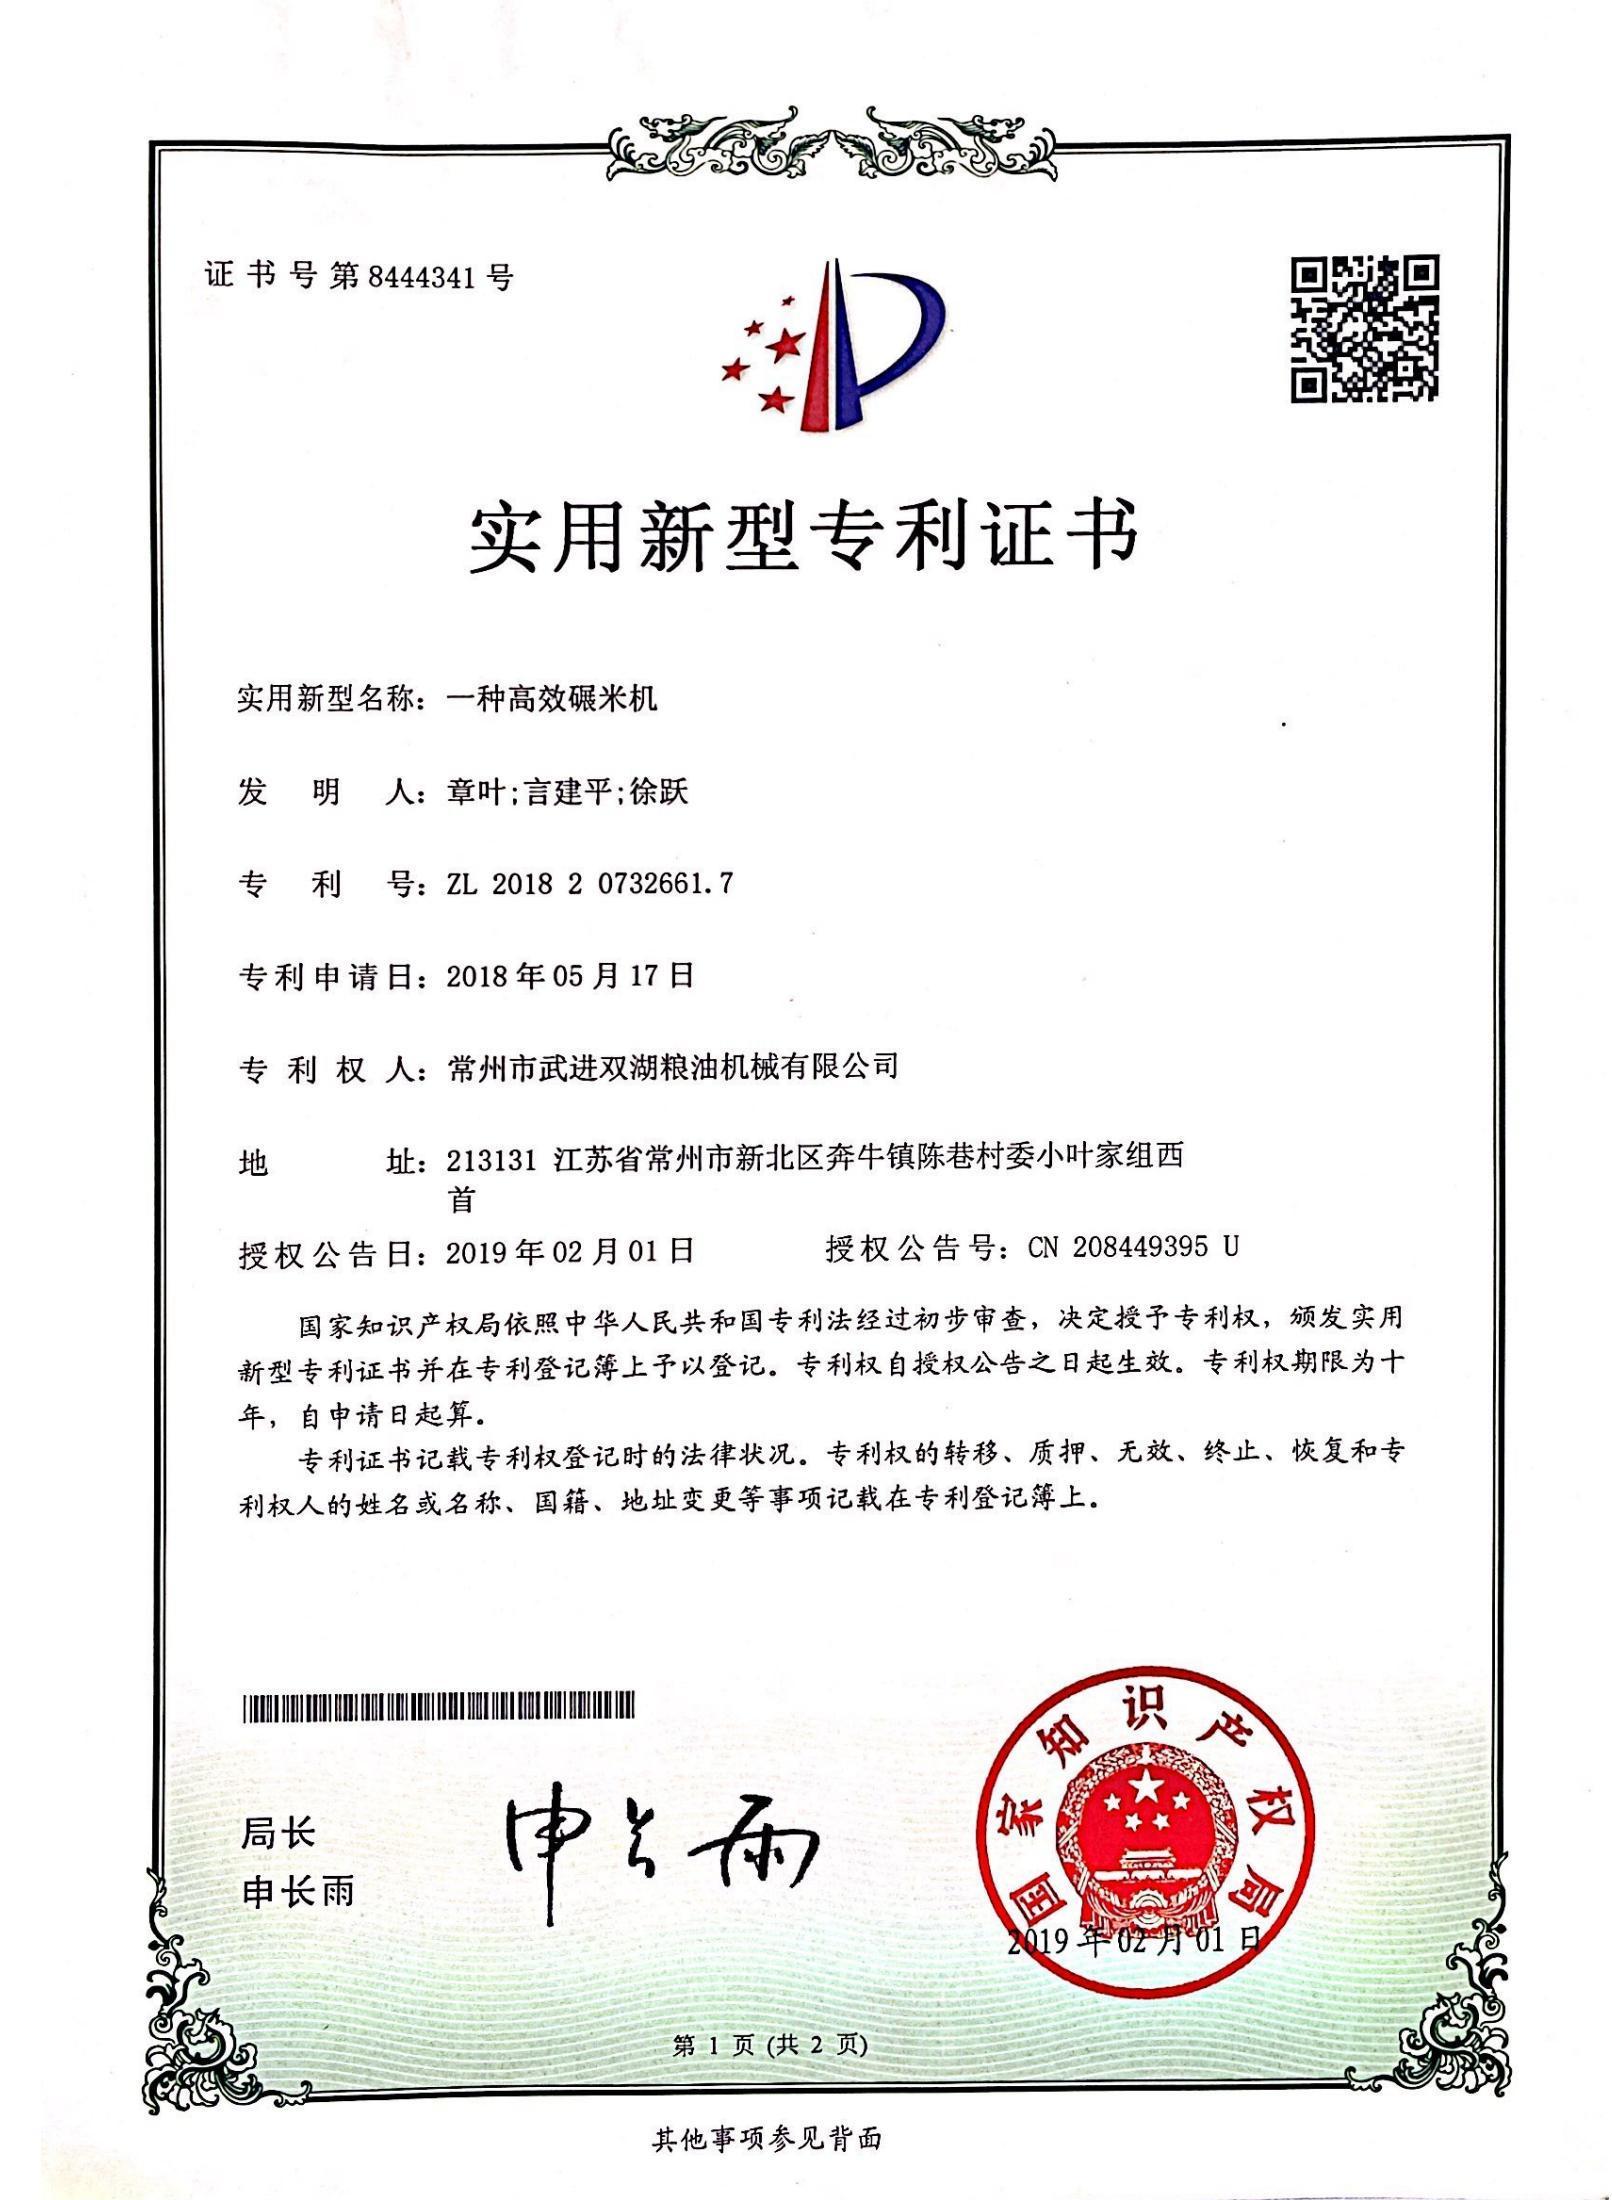 Patent certificate of high-efficiency rice milling machine